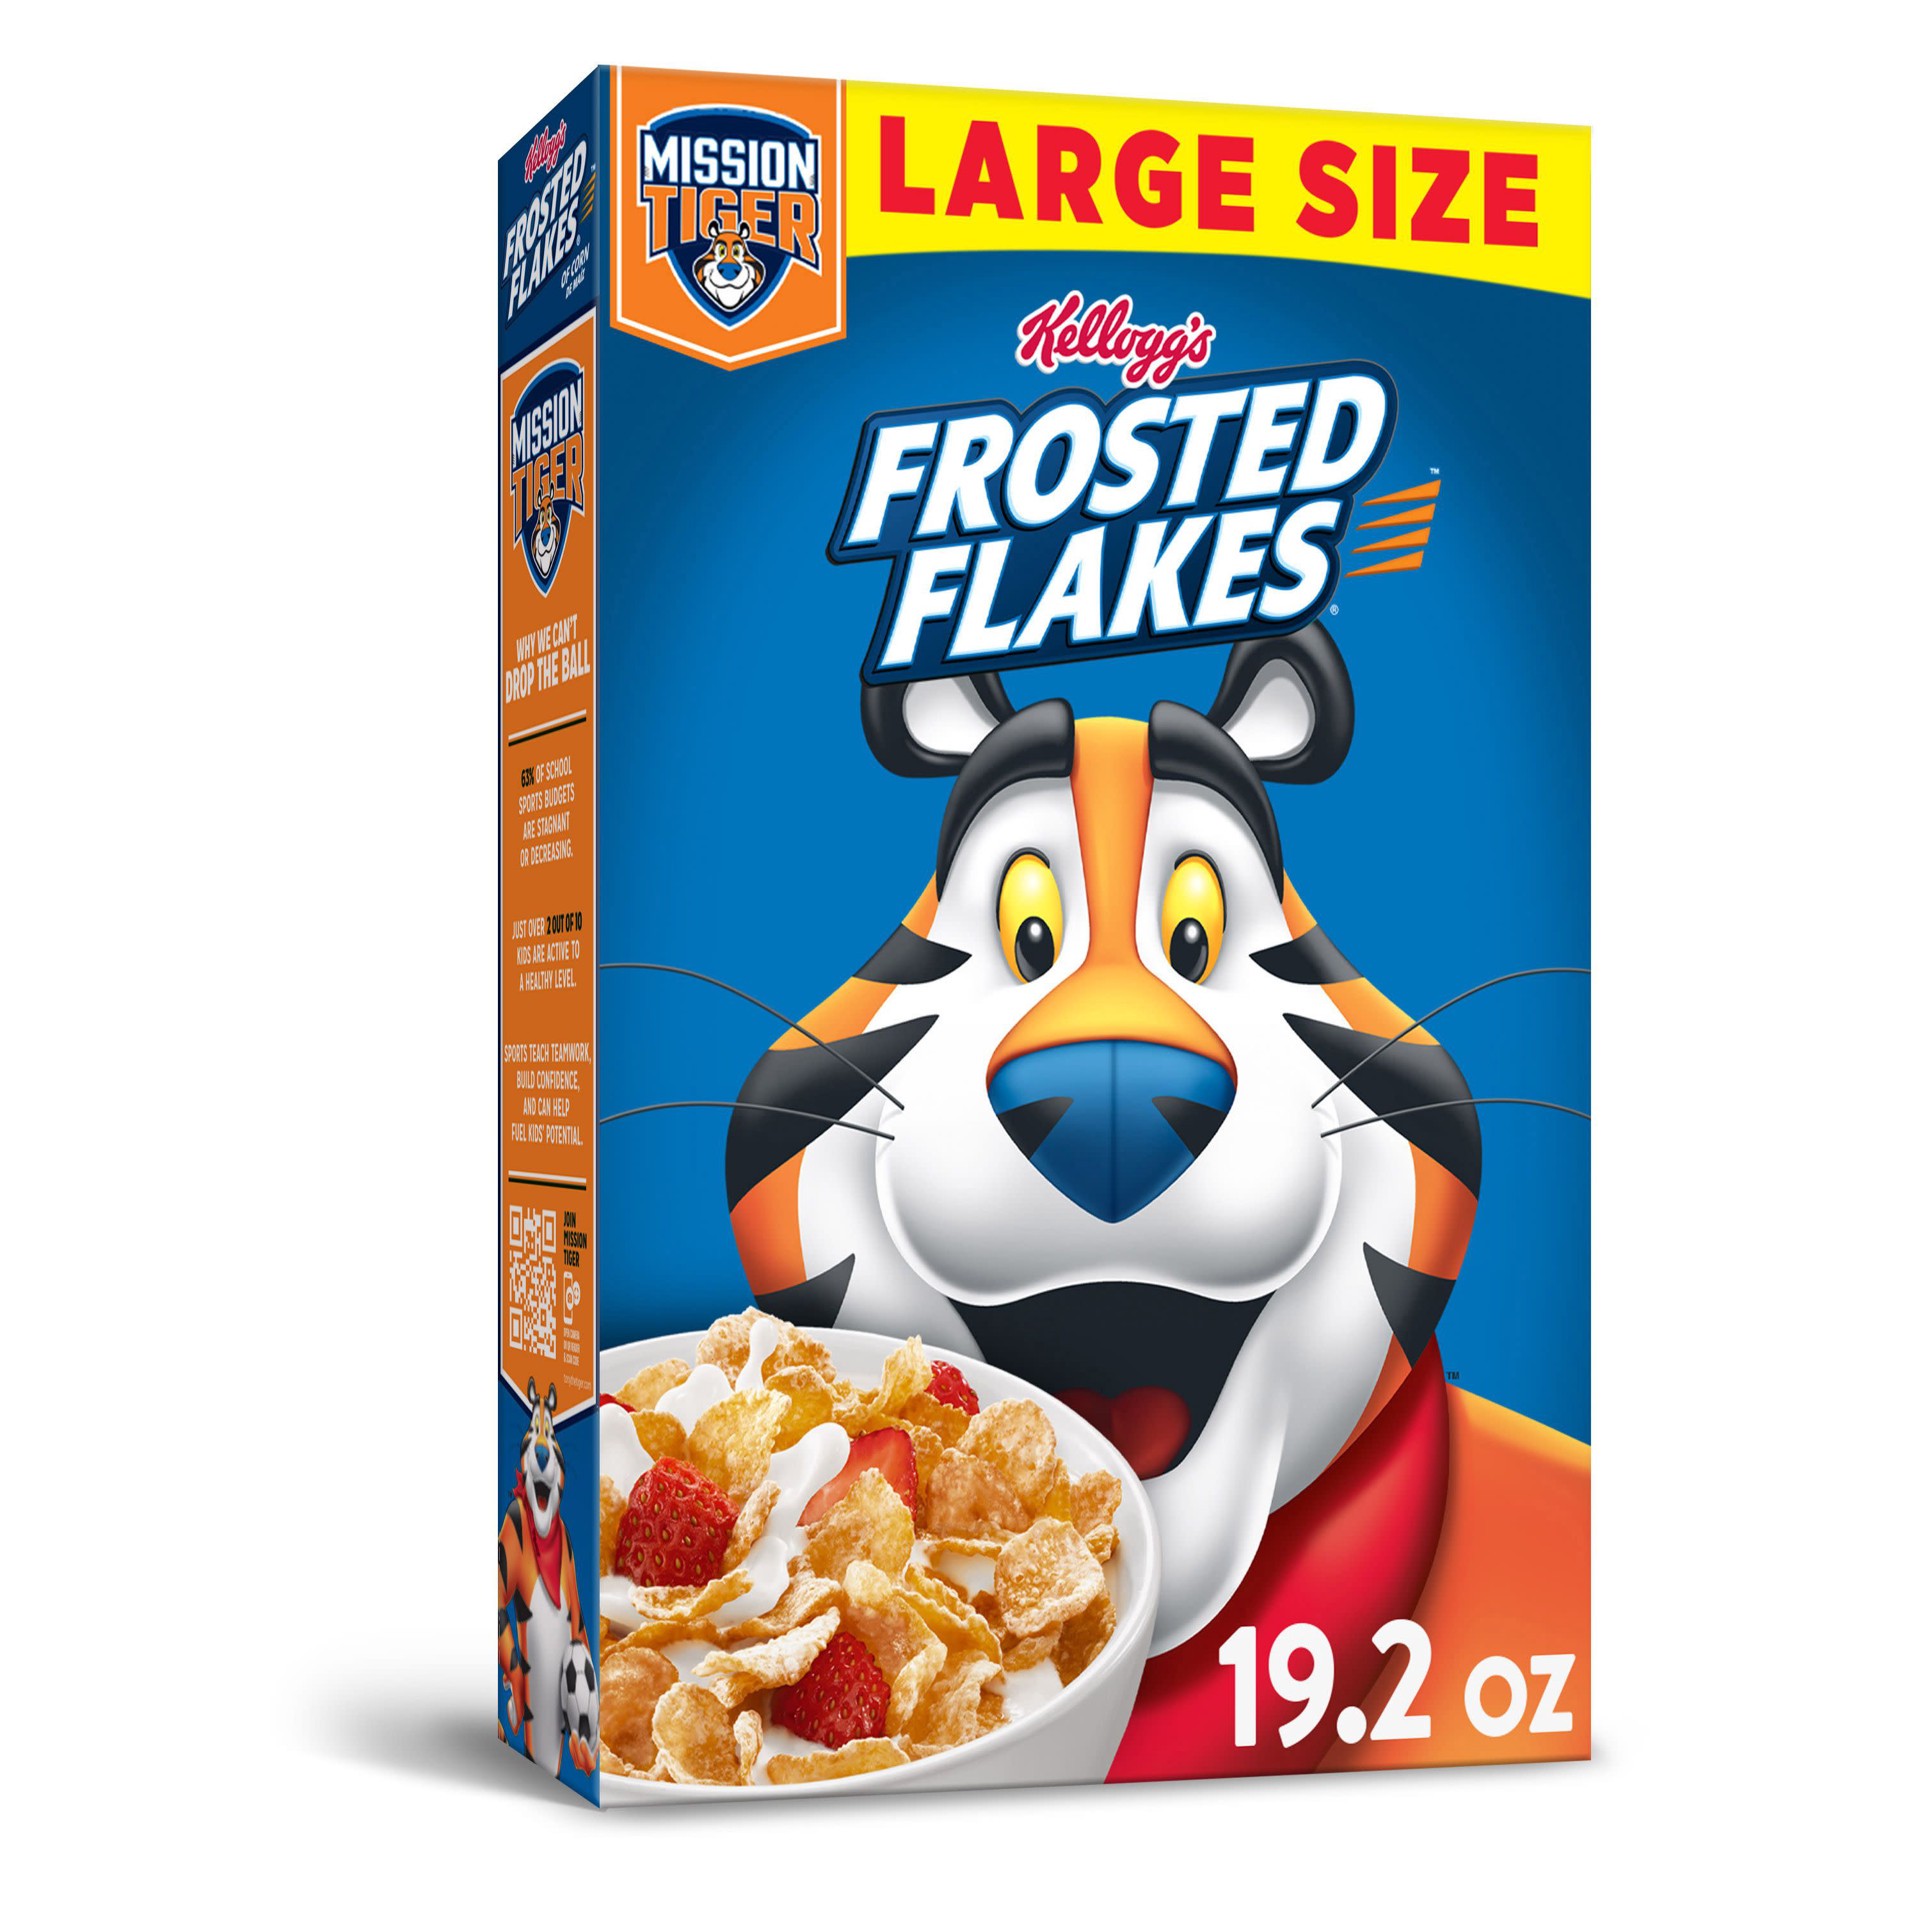 slide 1 of 5, Frosted Flakes Kellogg's Frosted Flakes Breakfast Cereal, 8 Vitamins and Minerals, Kids Snacks, Large Size, Original, 19.2oz Box, 1 Box, 19.2 oz